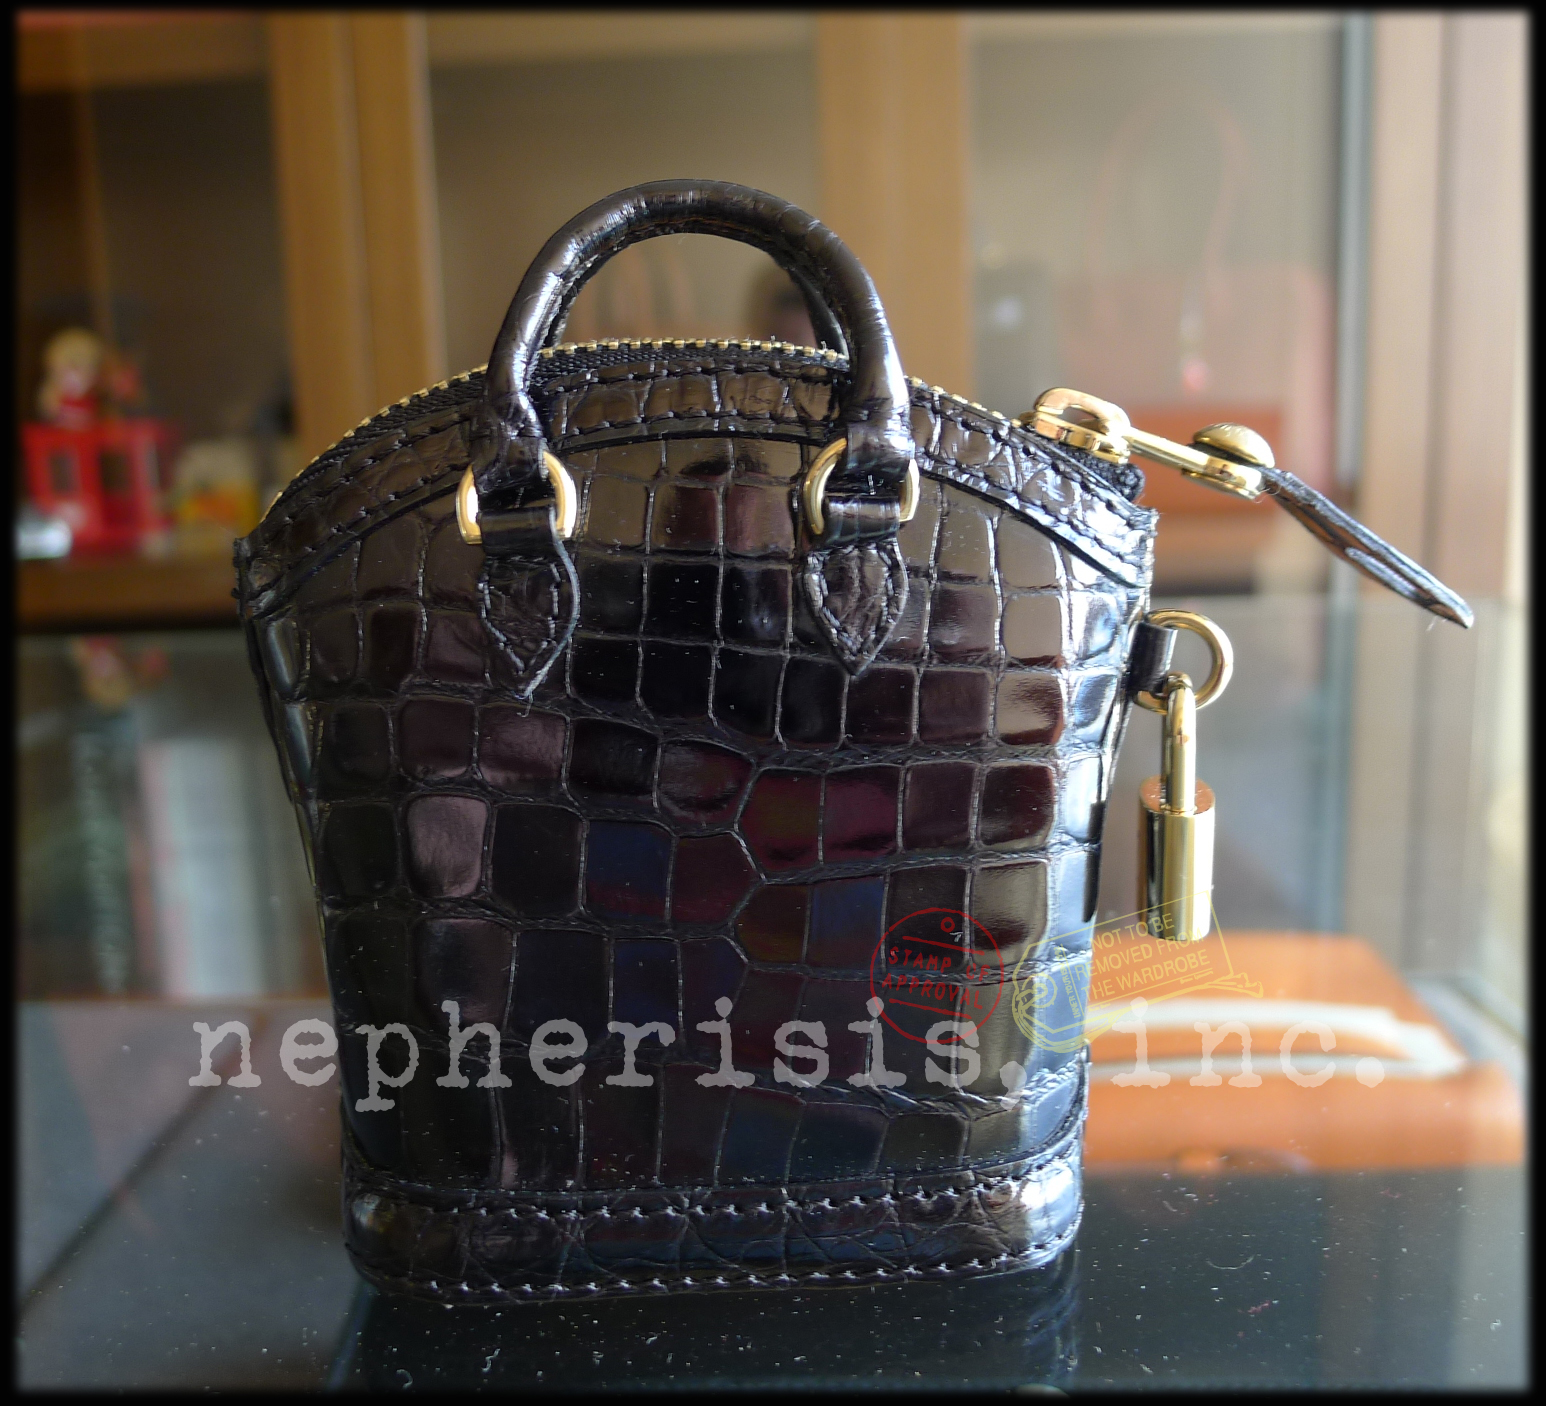 nepherisis, inc. - for the love of authentic luxury handbags and accessories!: June 2011